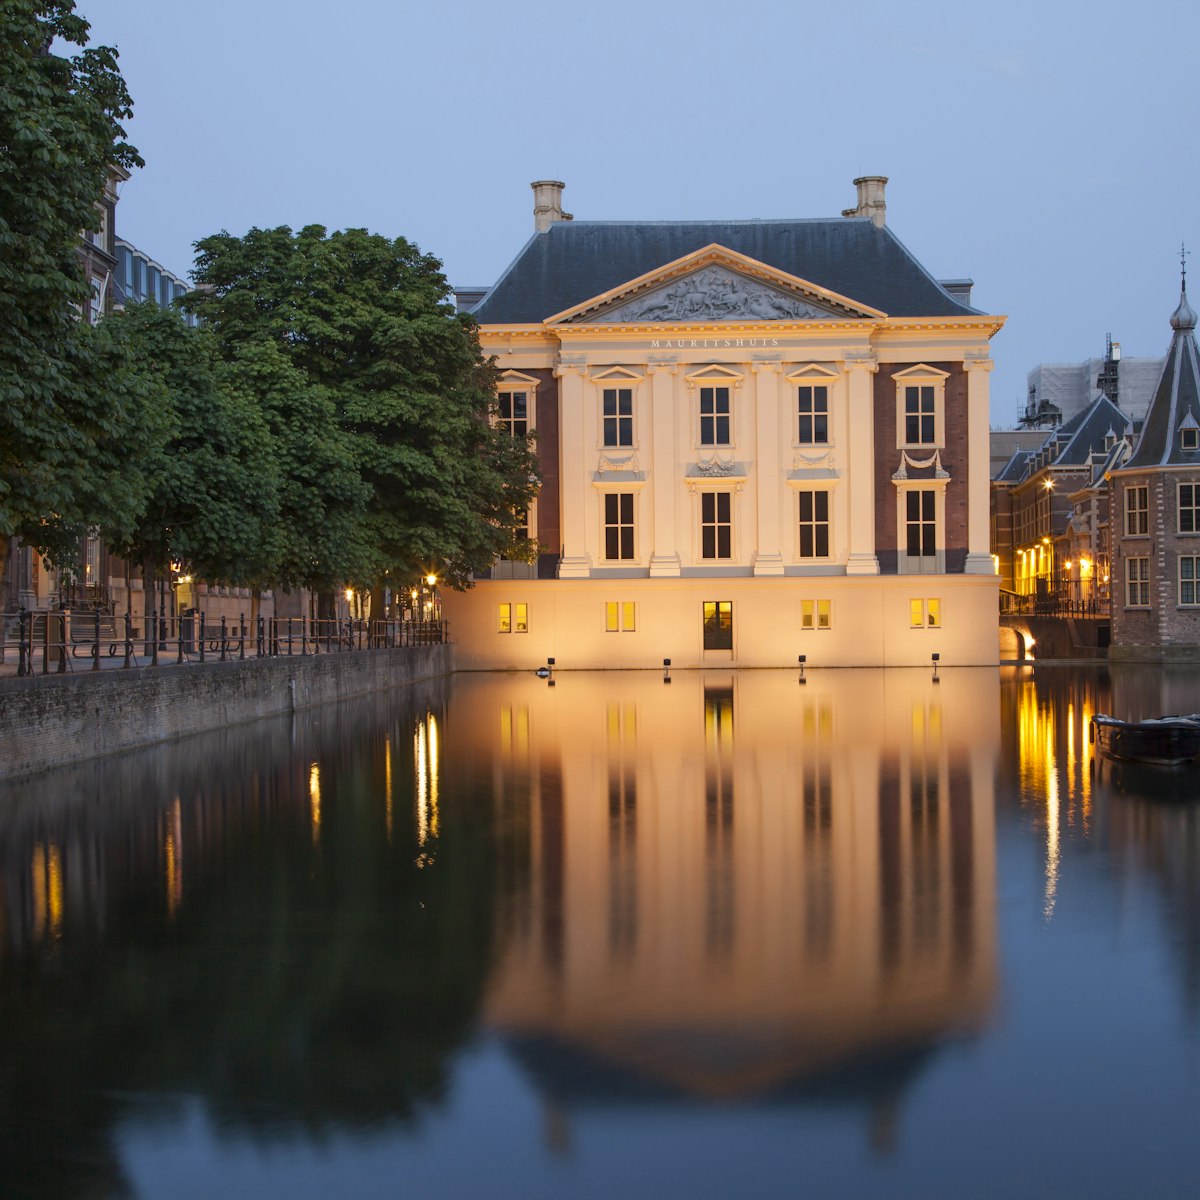 Mauritshuis Museum near Binnenhof Palace in Hague, Netherlands; Shutterstock ID 200624861; Your name (First / Last): Josh Vogel; Project no. or GL code: 56530; Network activity no. or Cost Centre: Online-Design; Product or Project: 65050/7529/Josh Vogel/LP.com Destination Galleries